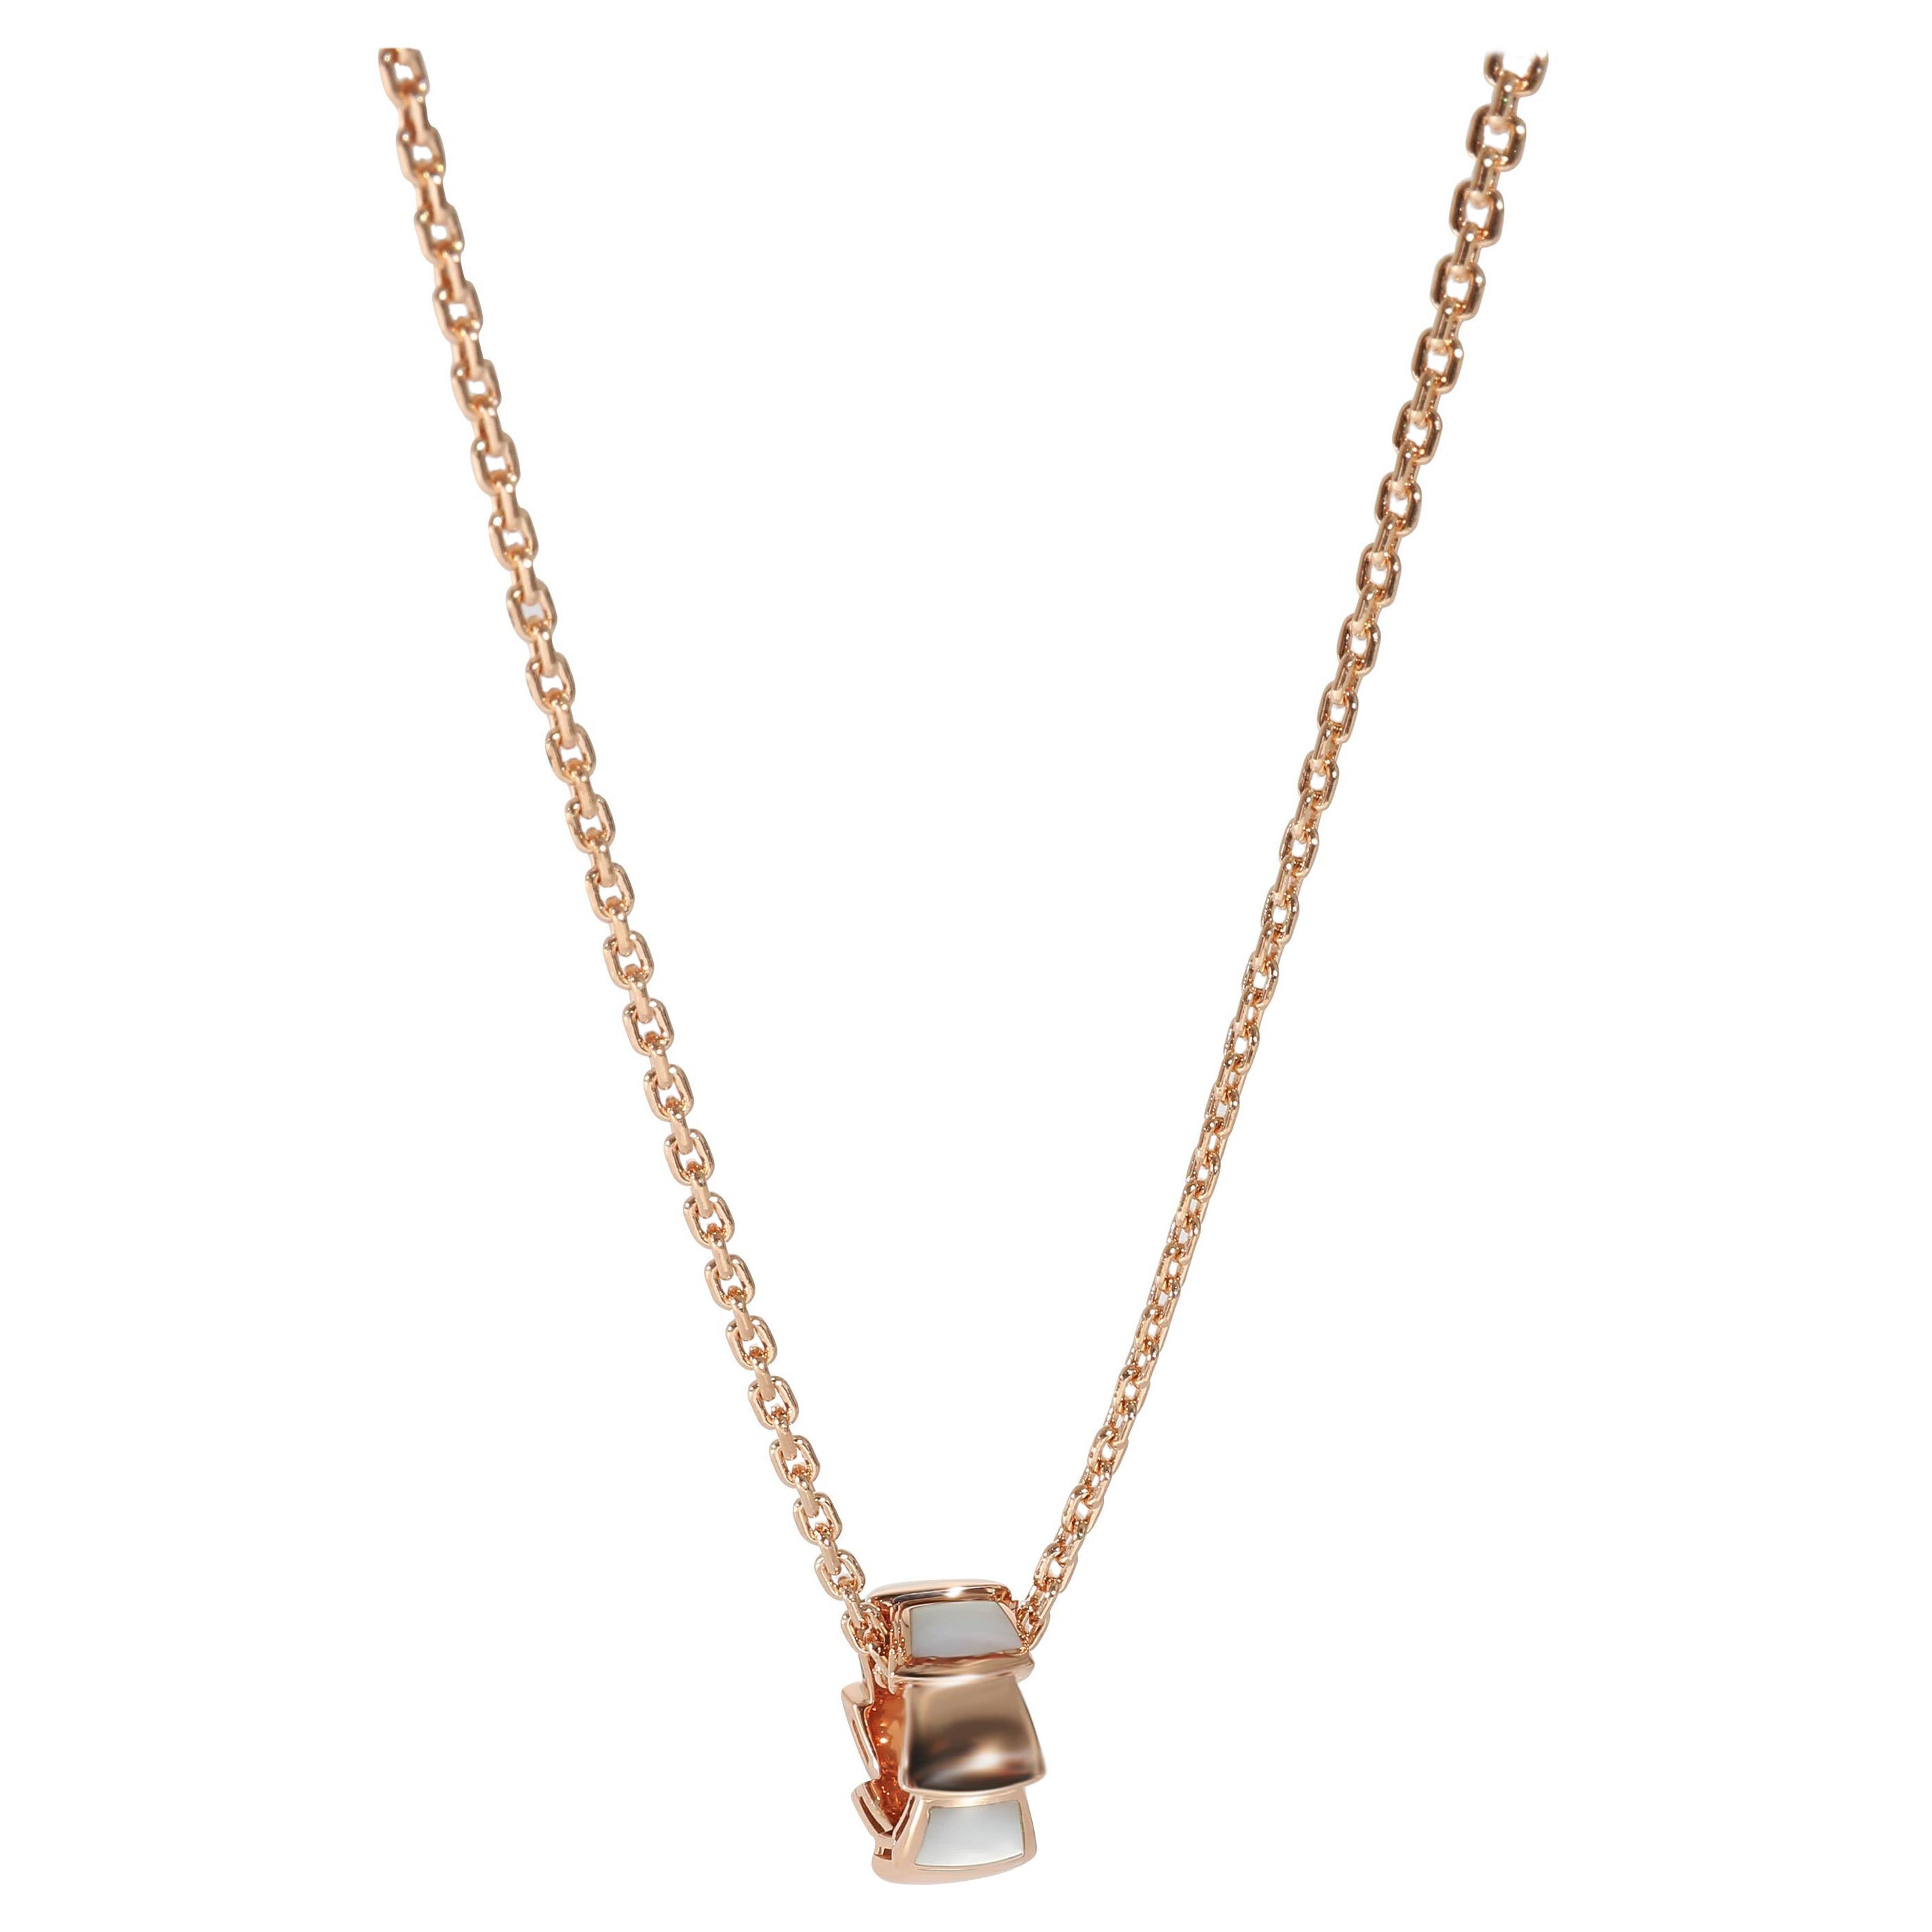 Bvlgari Serpenti Fashion Necklace in 18k Rose Gold For Sale